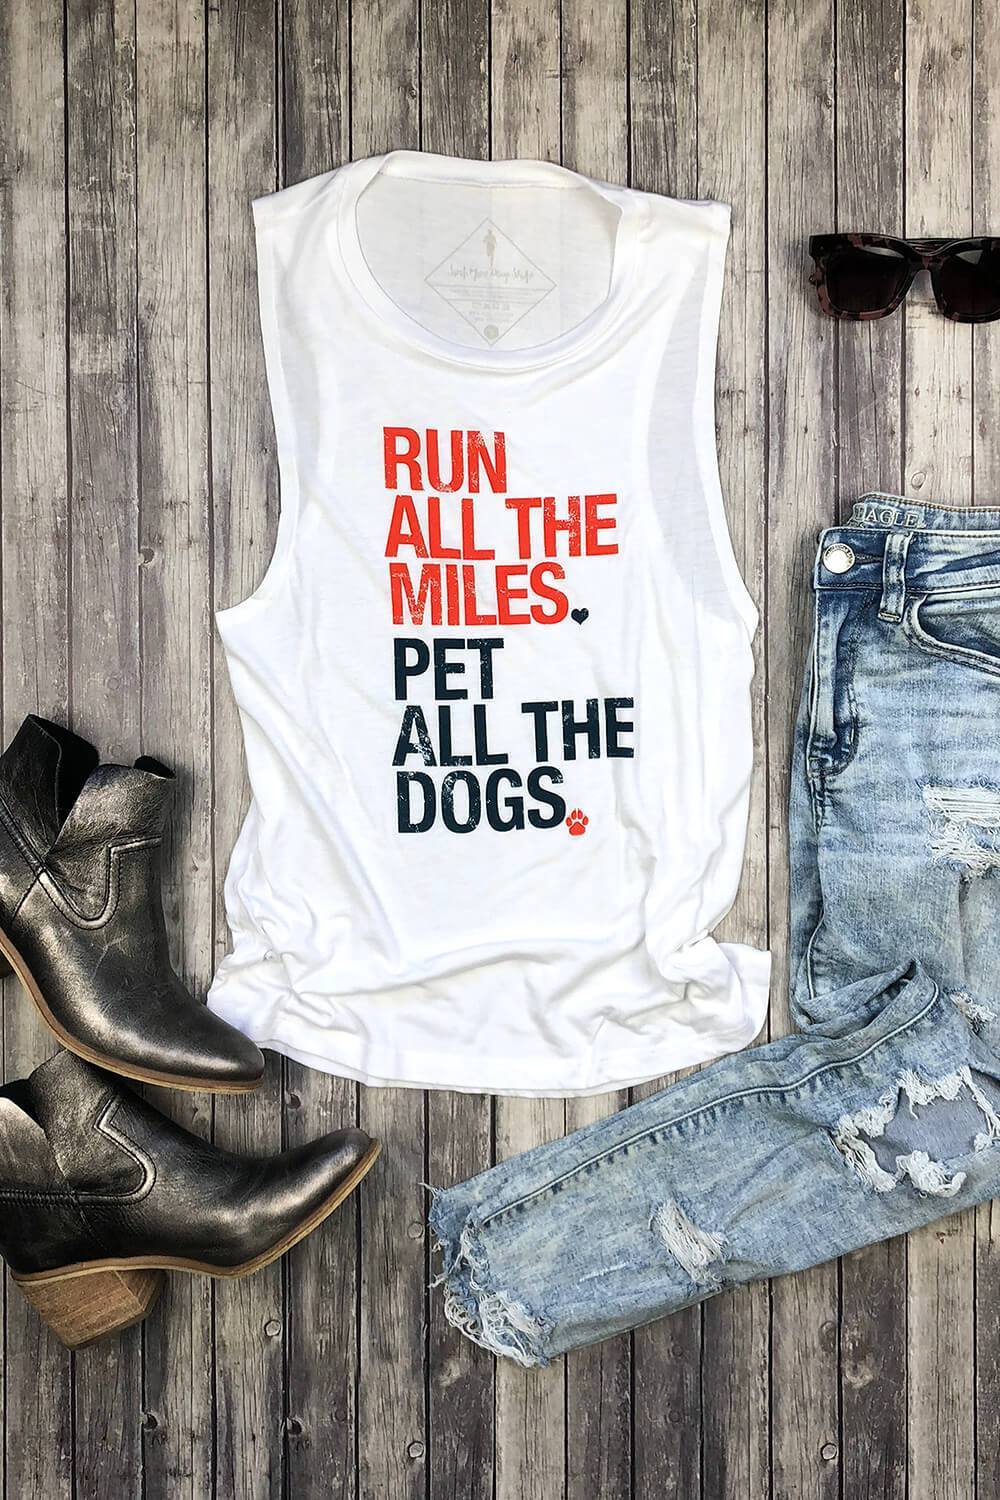 Sarah Marie Design Studio Women's Tank Small / Blue/Red Run All The Miles, Pet All The Dogs Women's Muscle Tank